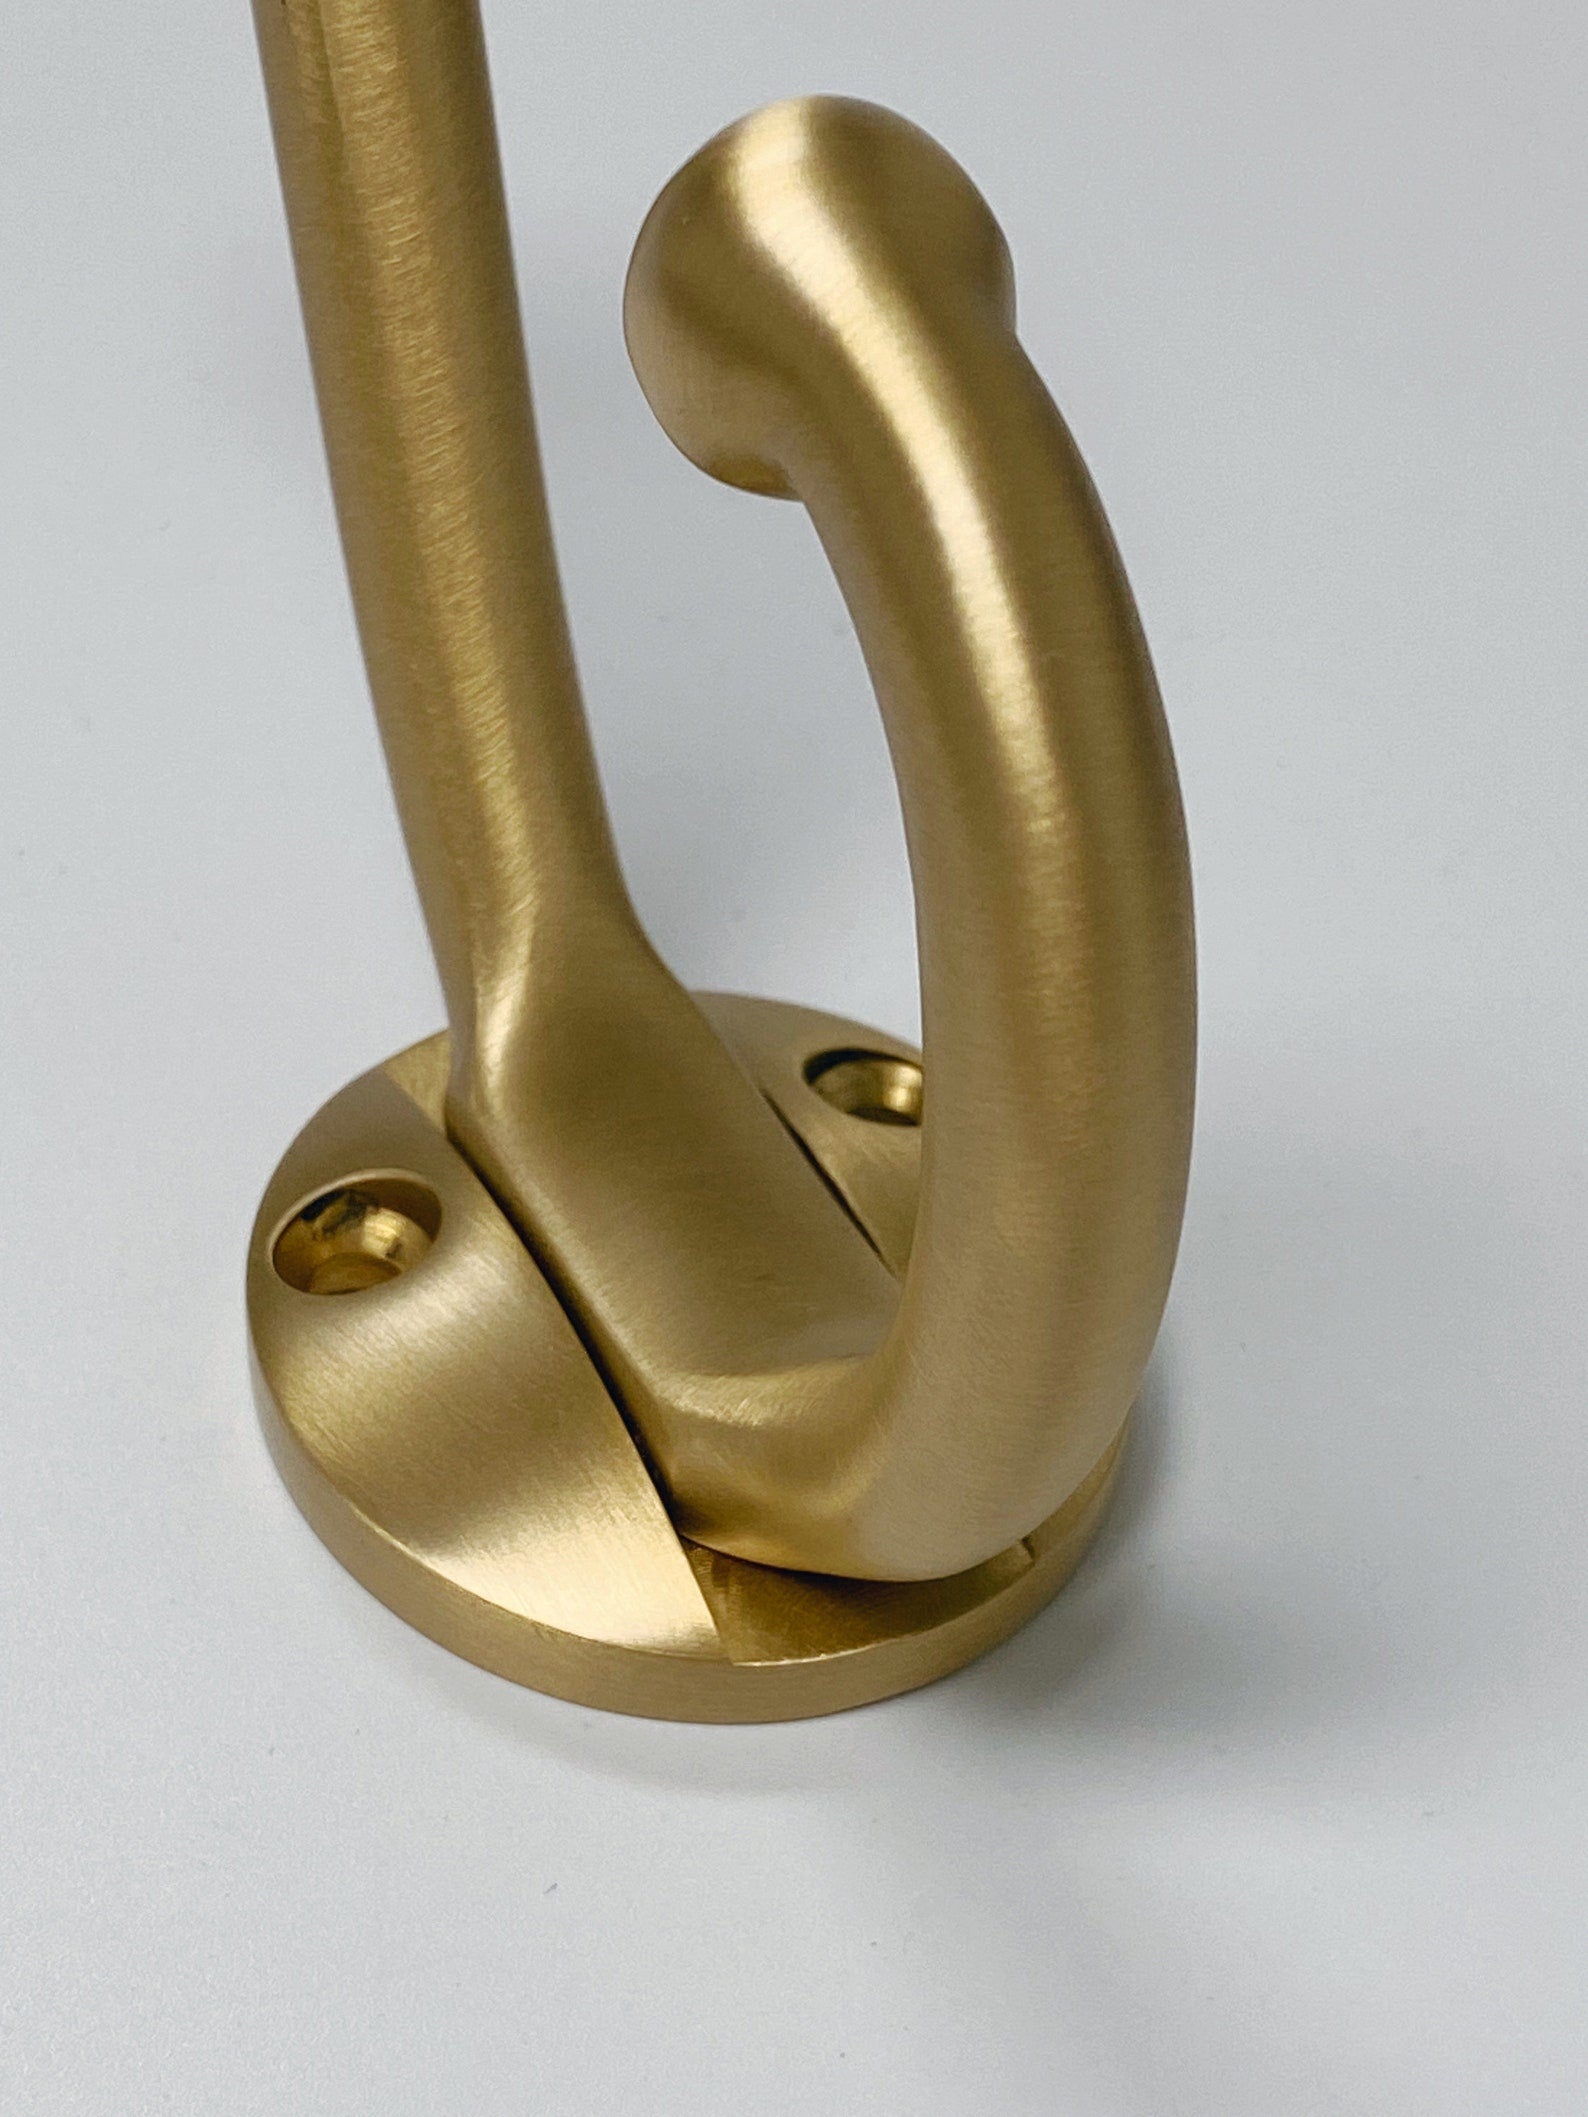 Coat hook - Almue - Brass with lacquer - Model 6535